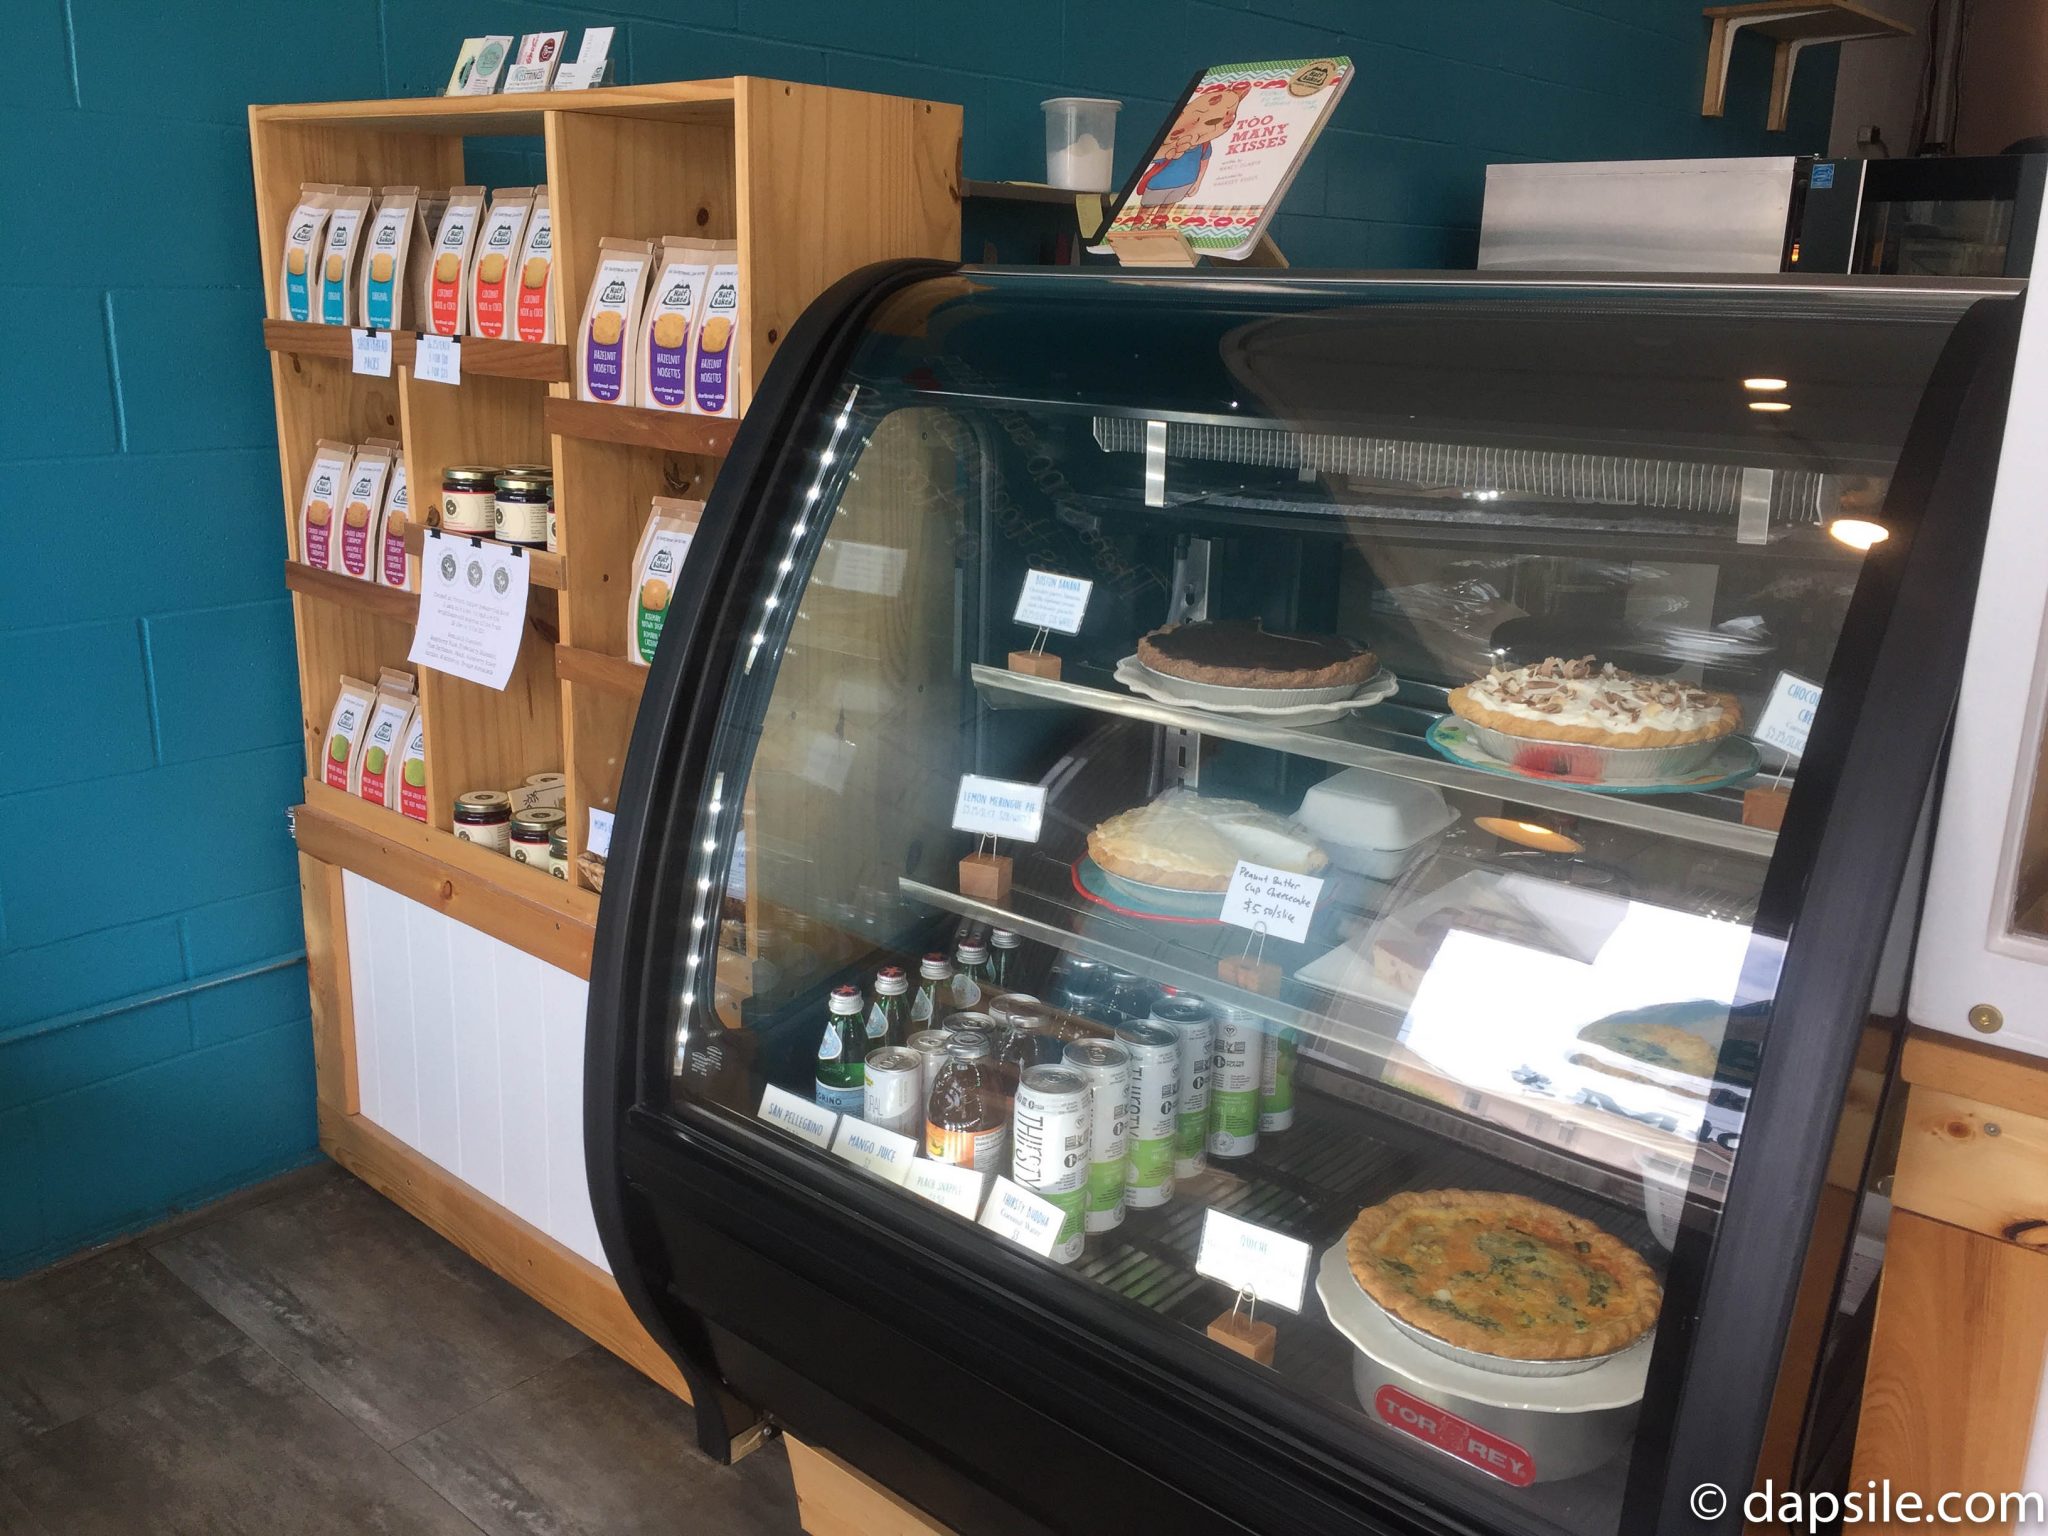 Packaged Shortbread and Chilled Treat Displays in Half Baked Cookie Company